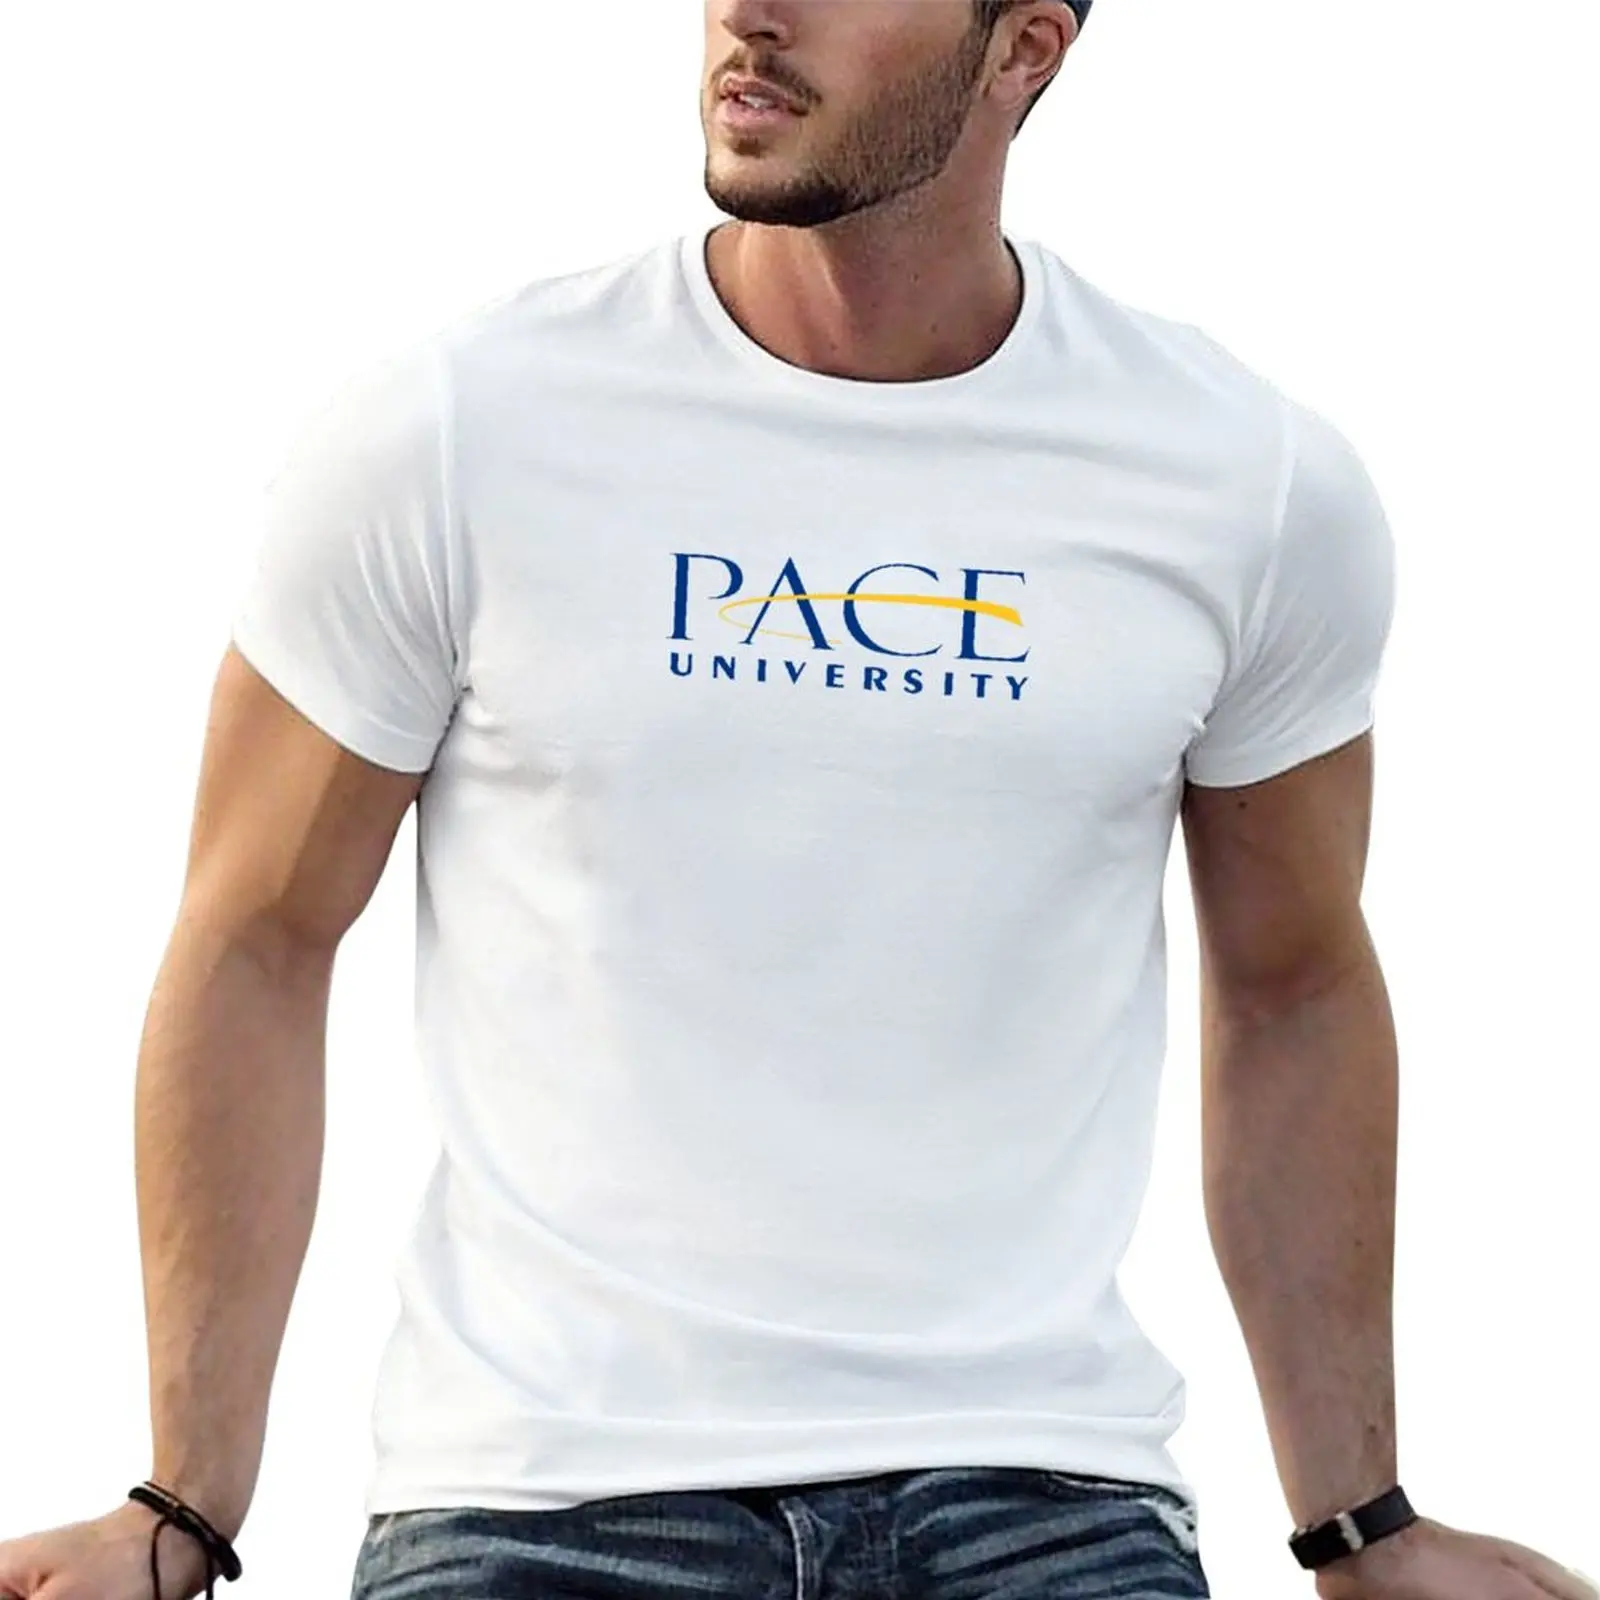 

Pace University T-Shirt vintage t shirt tops summer clothes big and tall t shirts for men